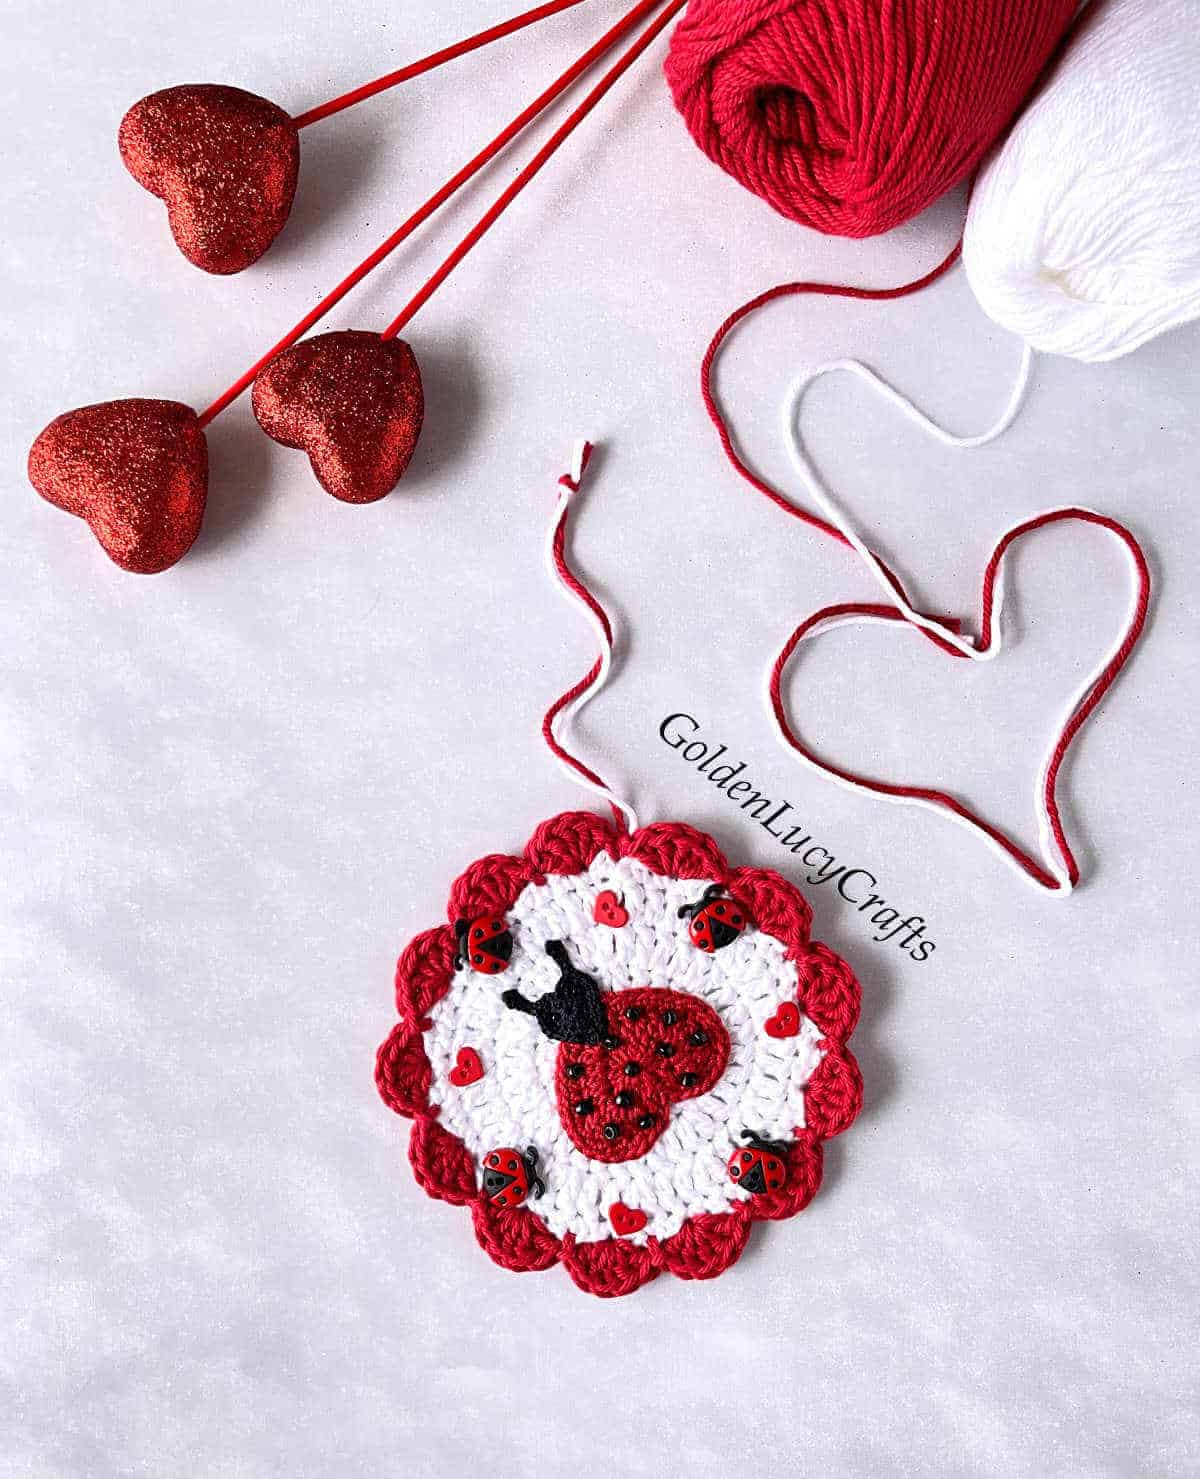 Crochet round ornament embellished with heart ladybug applique.